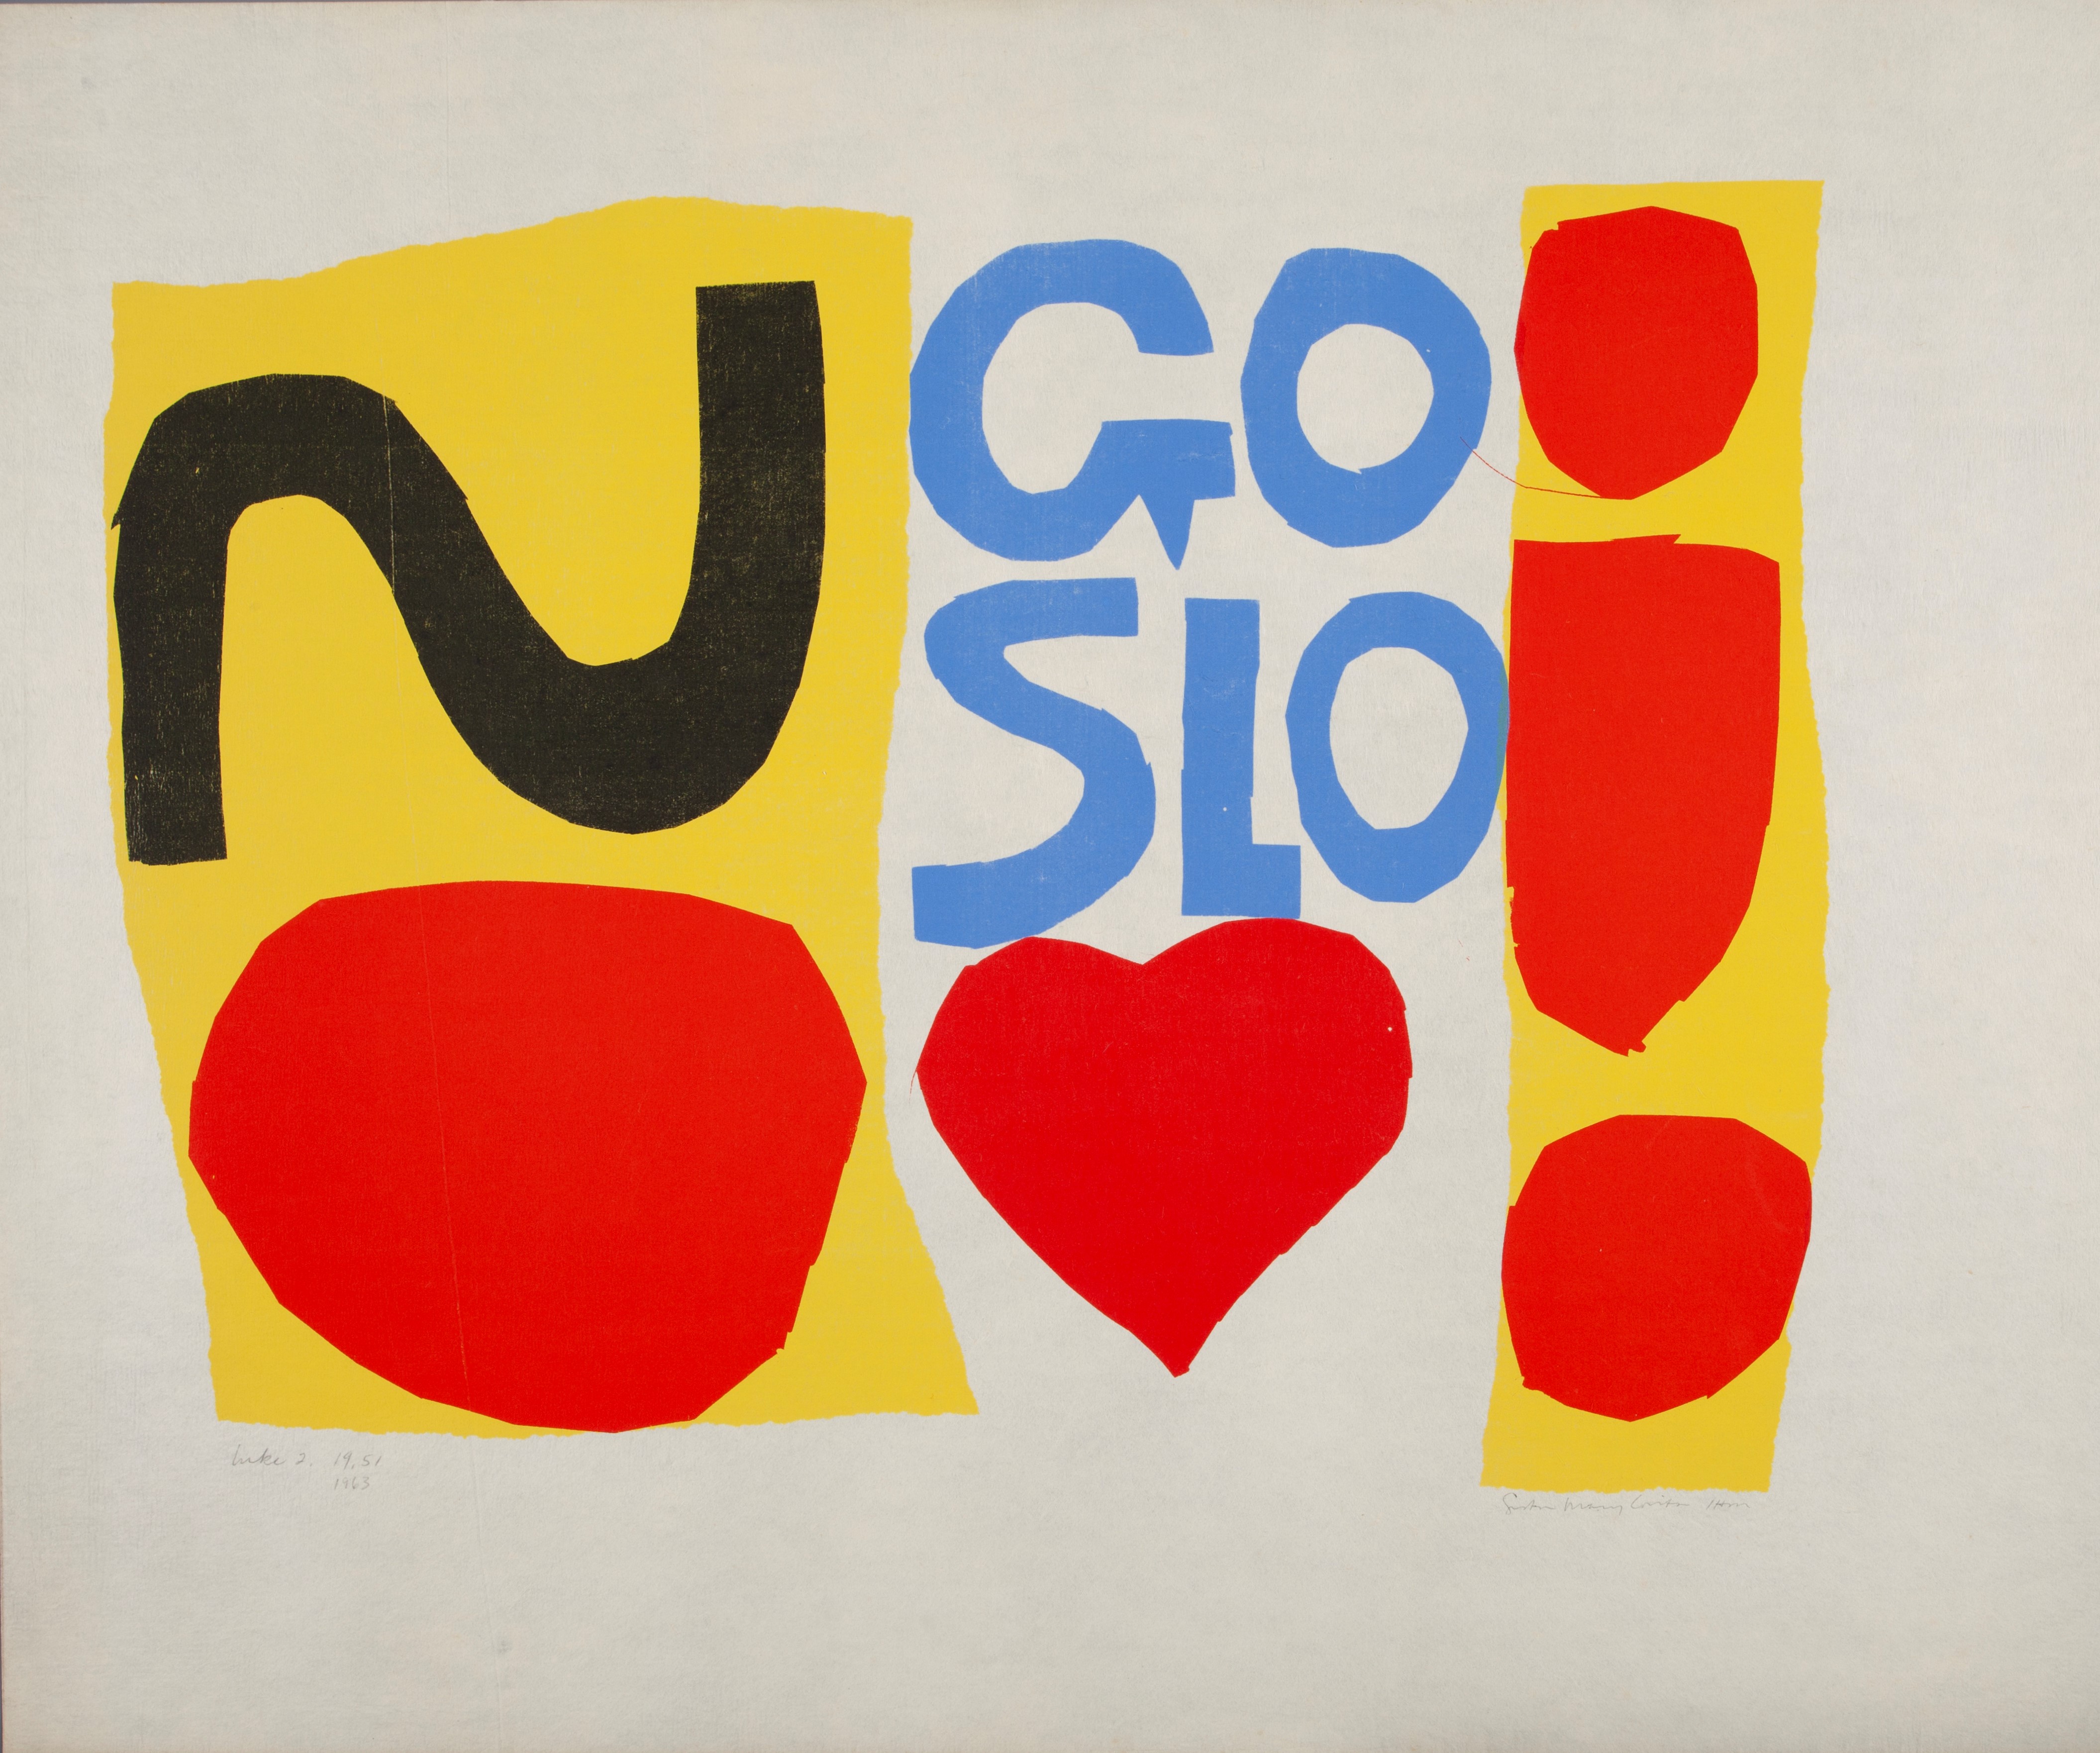 Left side of image has a yellow rectangle figure with a black sideways s on top of a red circular blob, middle of the page has "go slo" in blue with a red heart above it and right side of the page has a yellow rectangle background with a red spot on top with an oval red blob in the middle and a red circle on the bottom